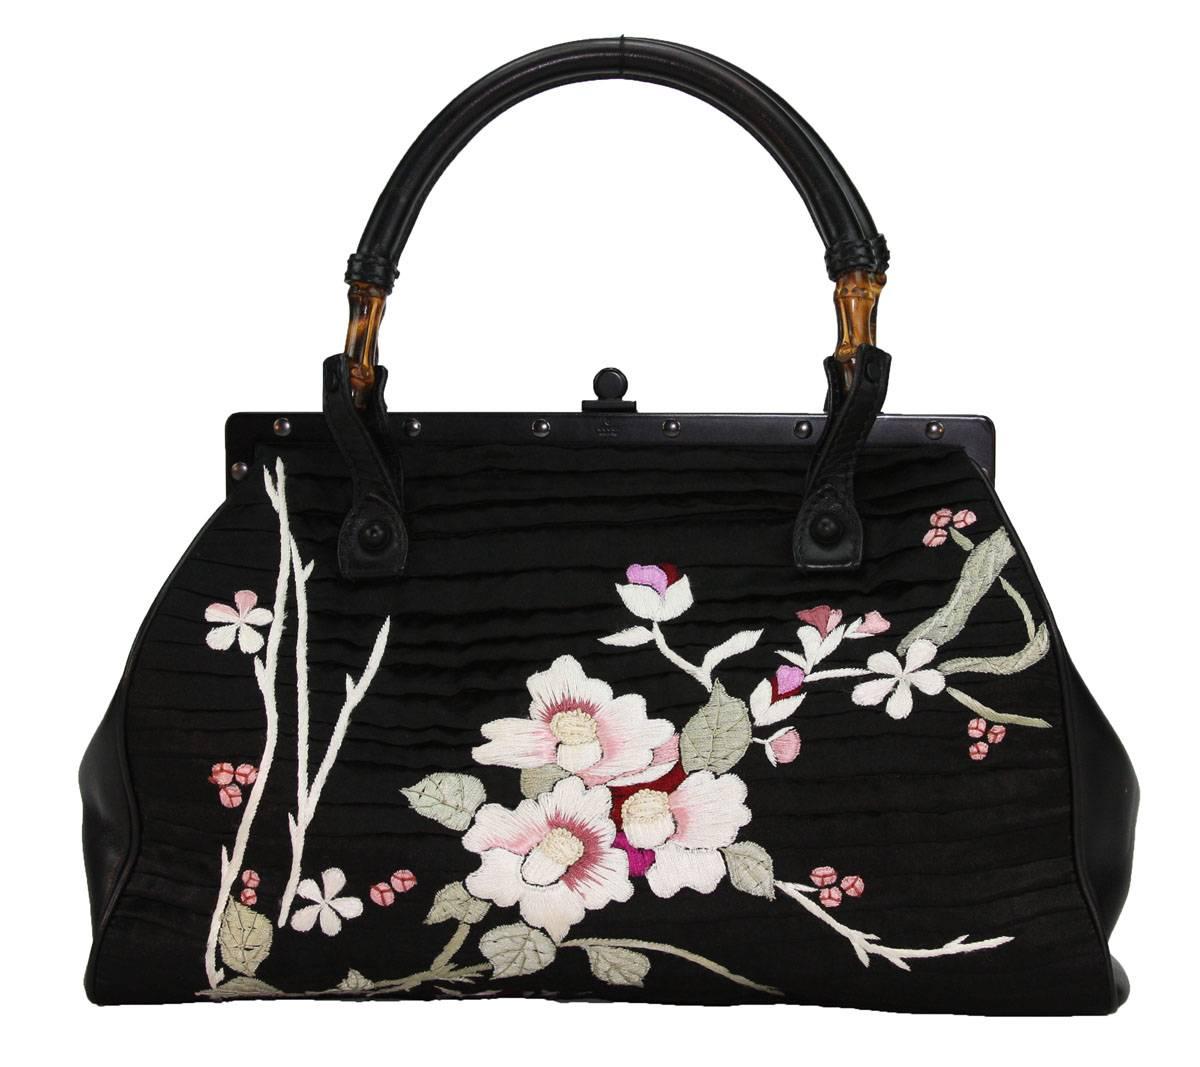 TOM FORD for GUCCI BLACK SILK FRAME JAPANESE FLOWERS BAG
S/S 2003 COLLECTION
RARE and COLLECTIBLE
COLOR – BLACK
SILK, LEATHER, BAMBOO
FLORAL JAPANISE EMBROIDERY IN WHITE, PINK, RED, GREEN ON BOTH SIDES
LEATHER SIDE PANES
FRAME-SHAPED